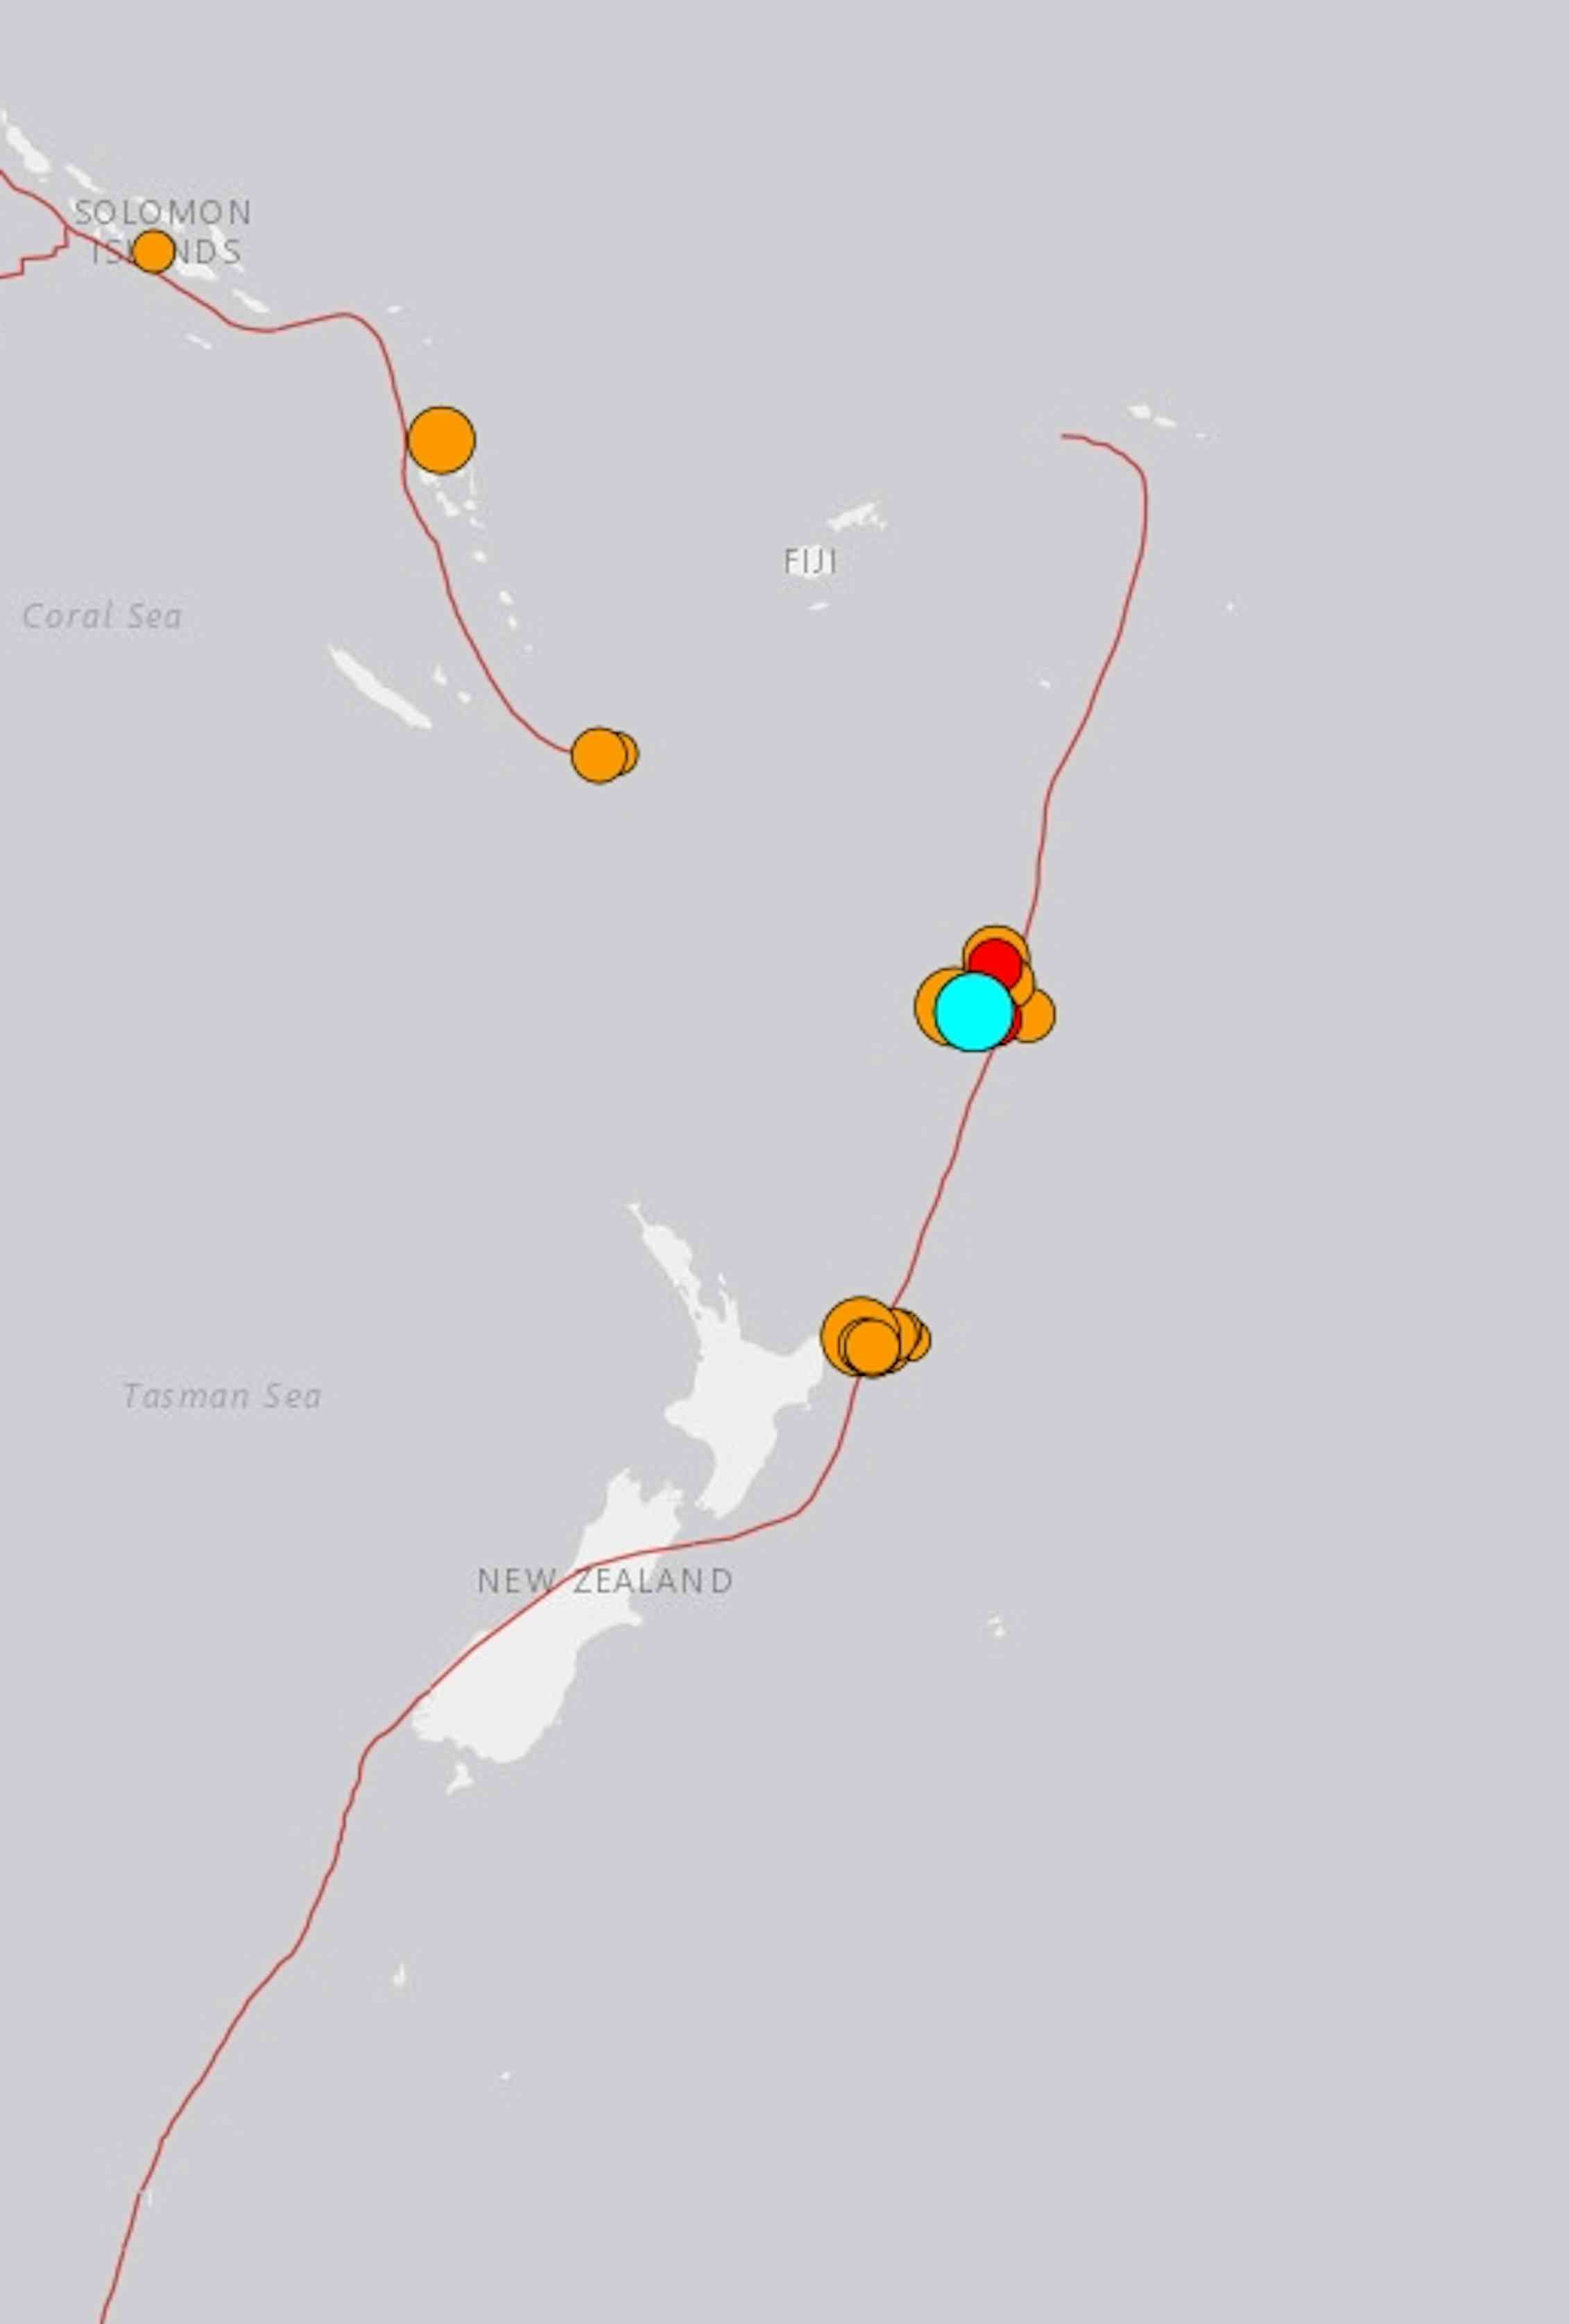 Following 3 Major Quakes Off New Zealand, Questions Remain About How They Might Be Linked